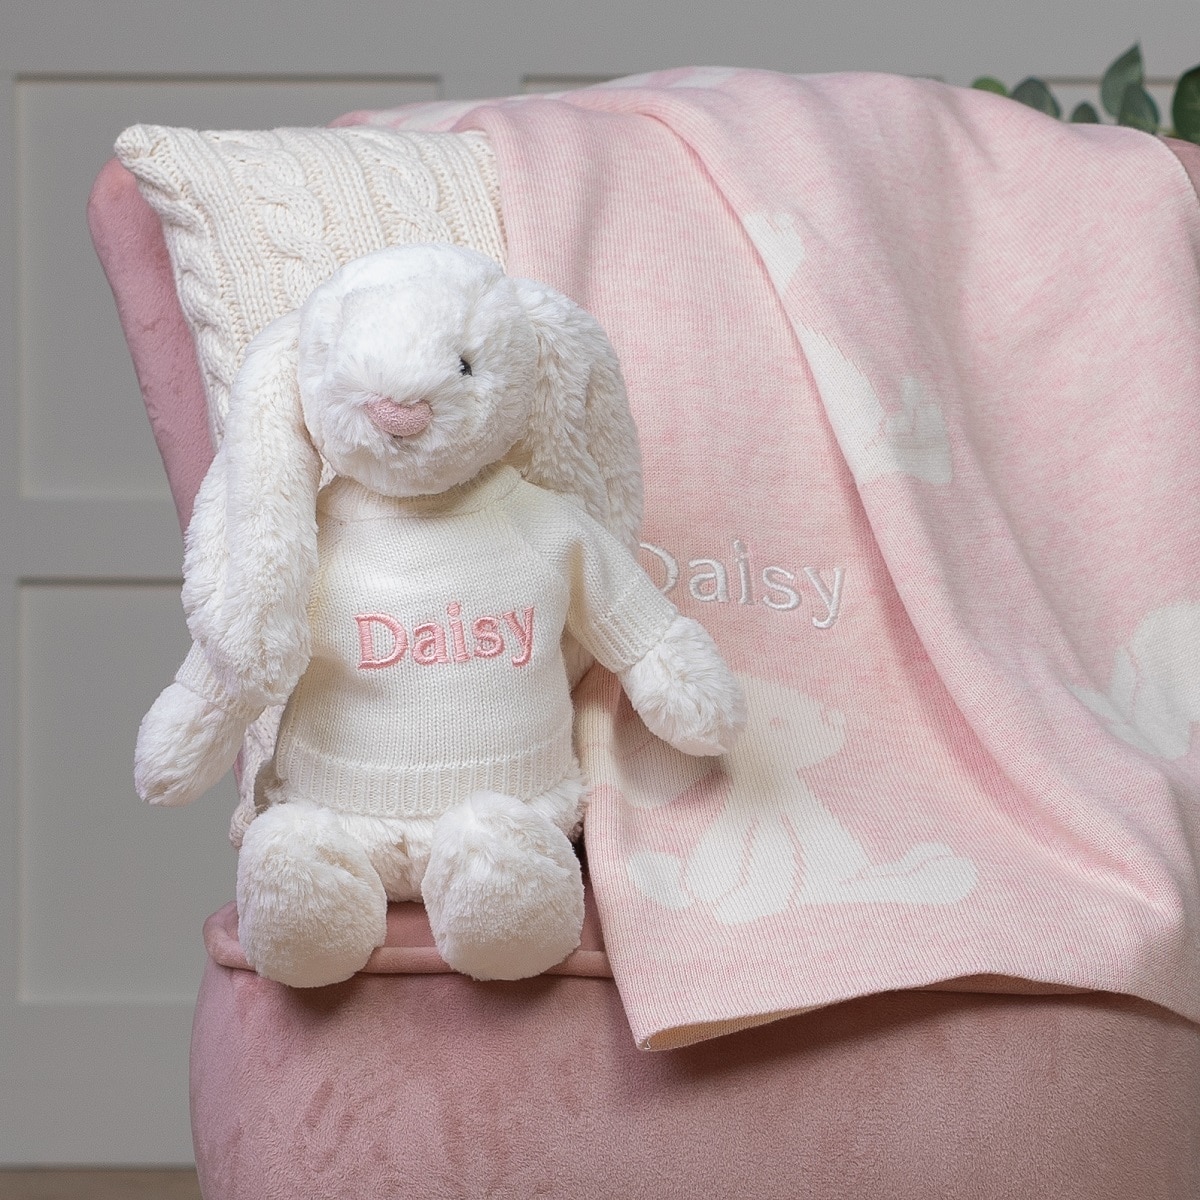 Personalised Jellycat pink bashful bunny and baby blanket gift set